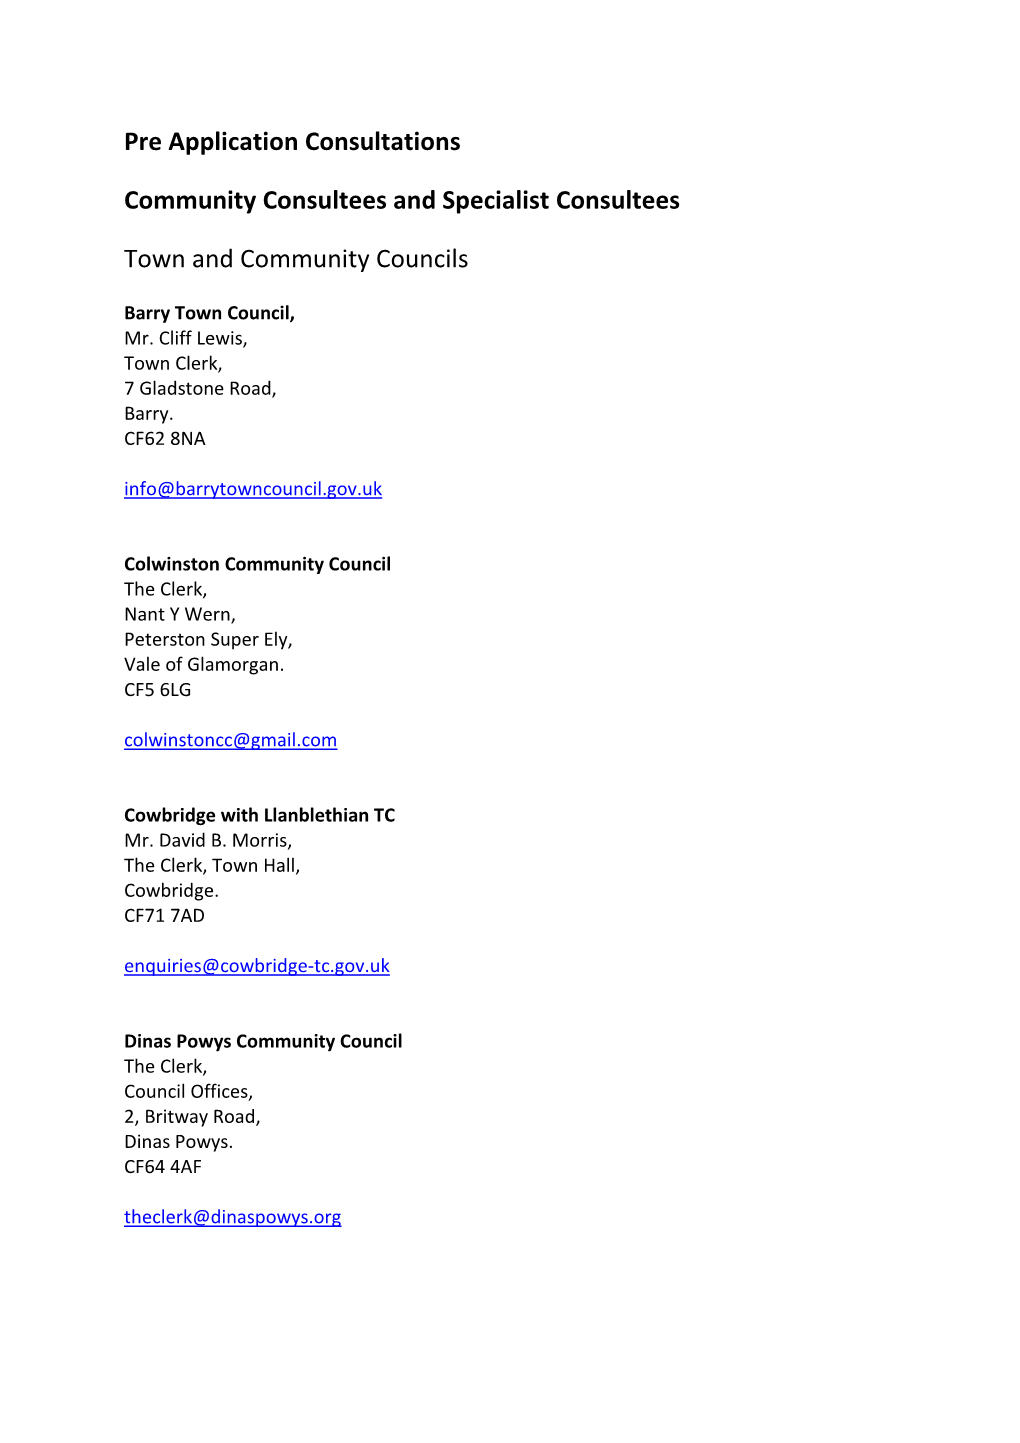 Community and Specialist Consultee List